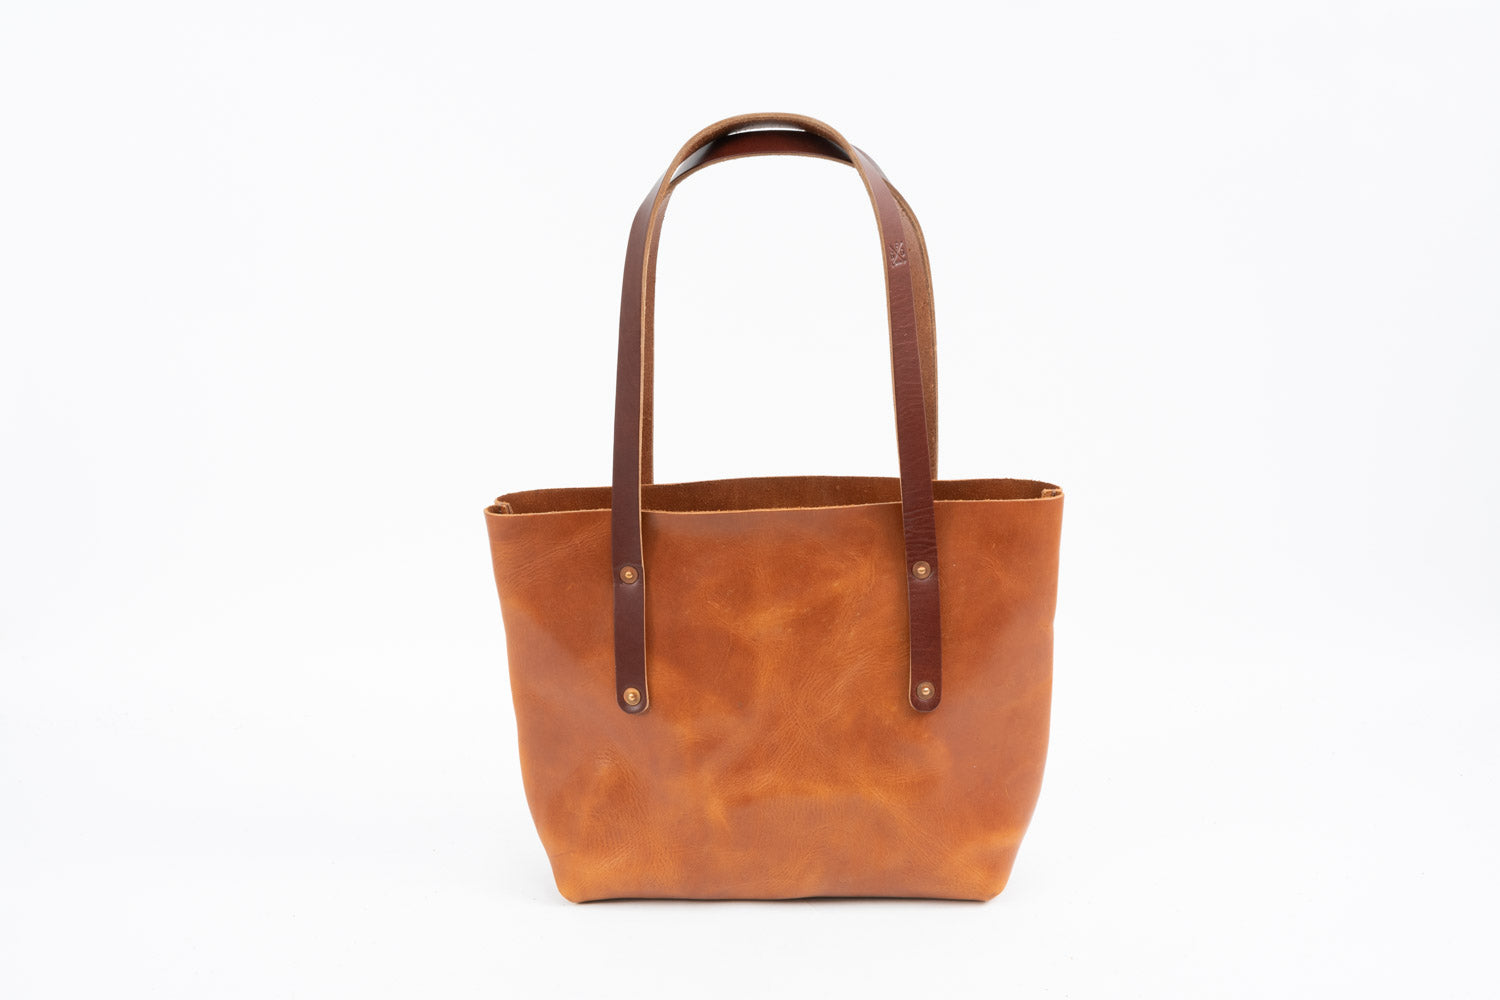 AVERY LEATHER TOTE BAG - SMALL CARAMEL (RTS)